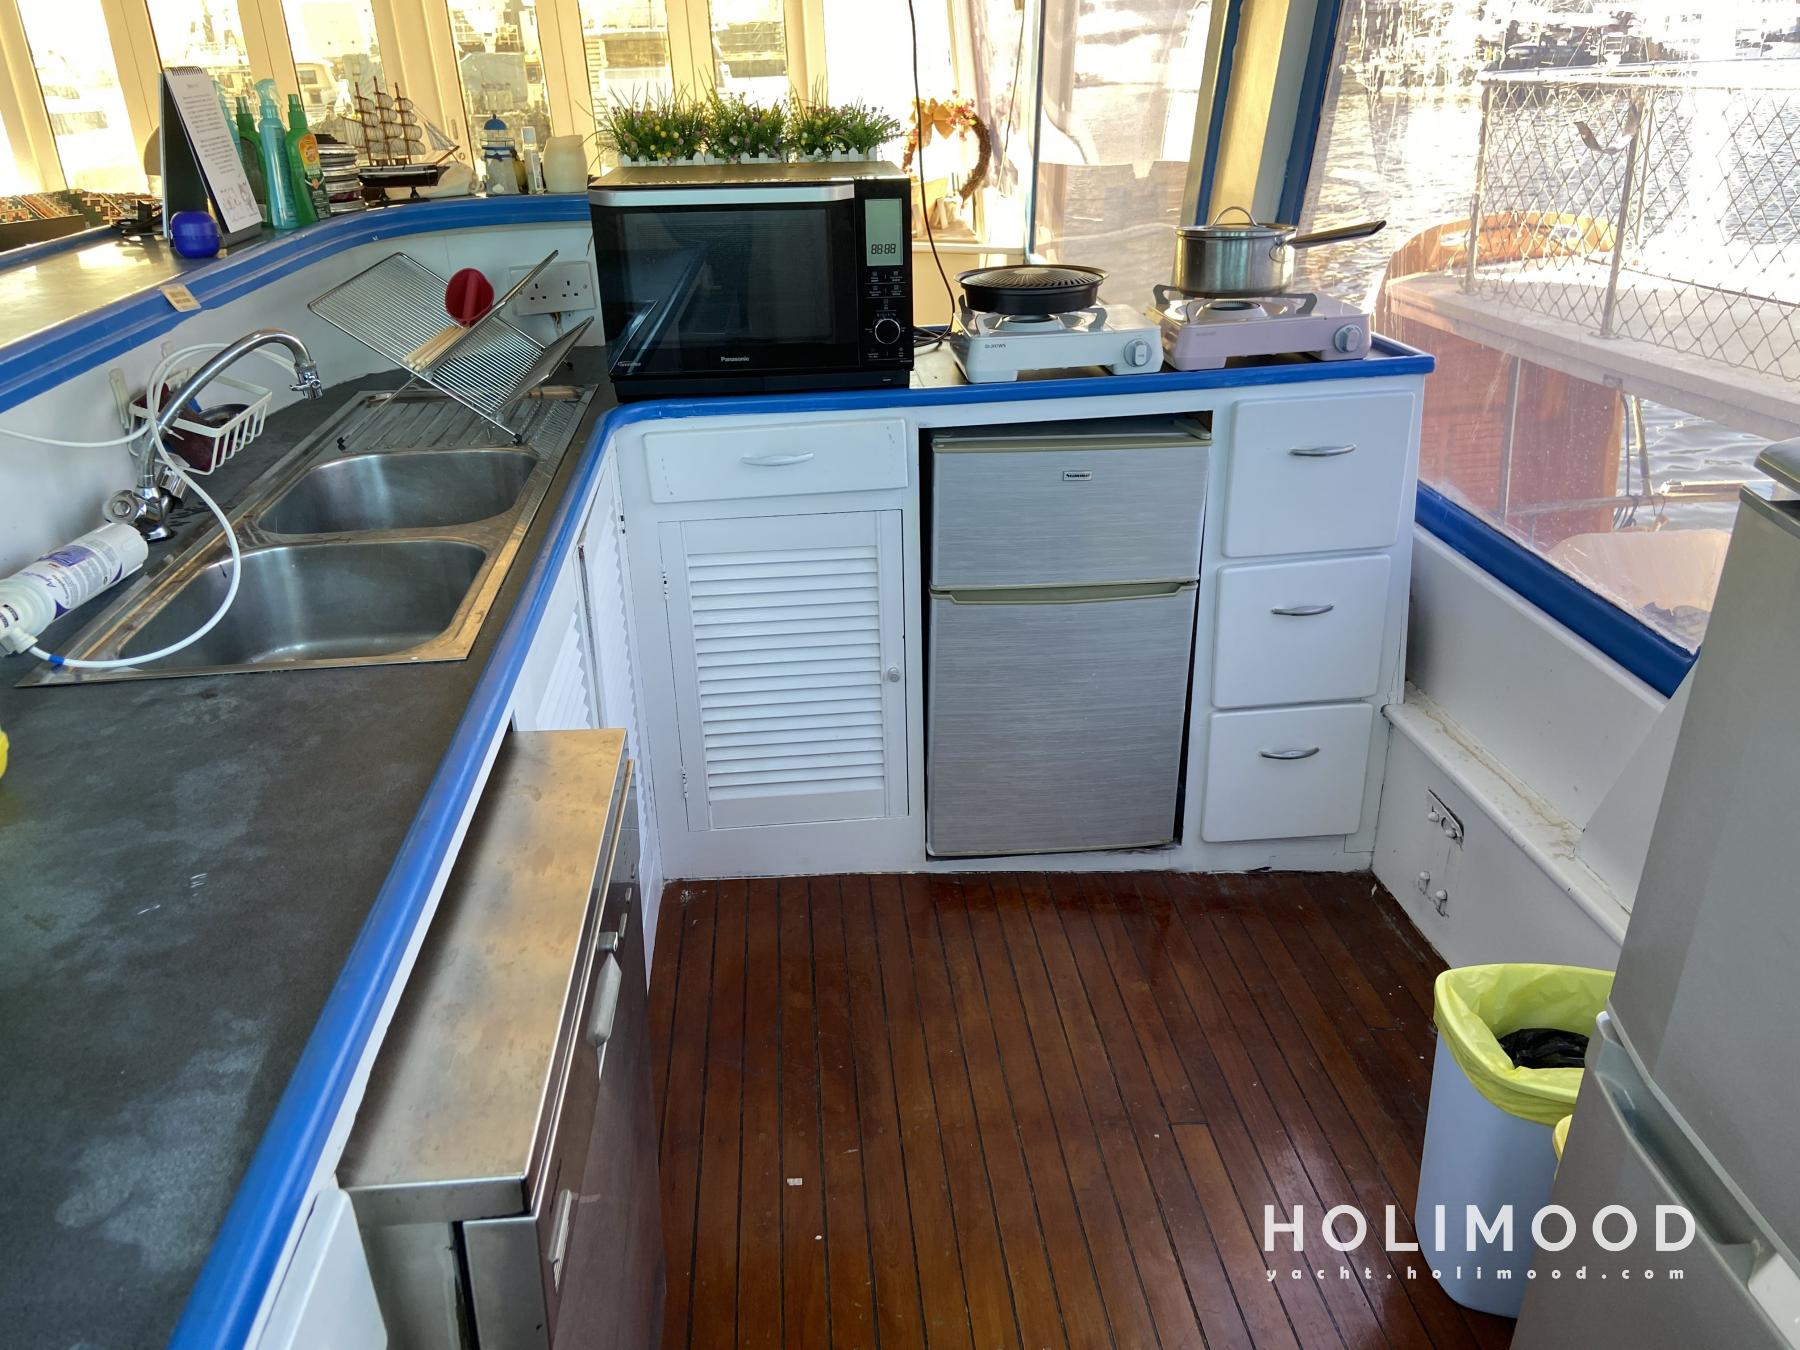 JR02 Kwun Tong 8-Hour Houseboat Party Room Pkg. (Board Game & Shuttle) 8